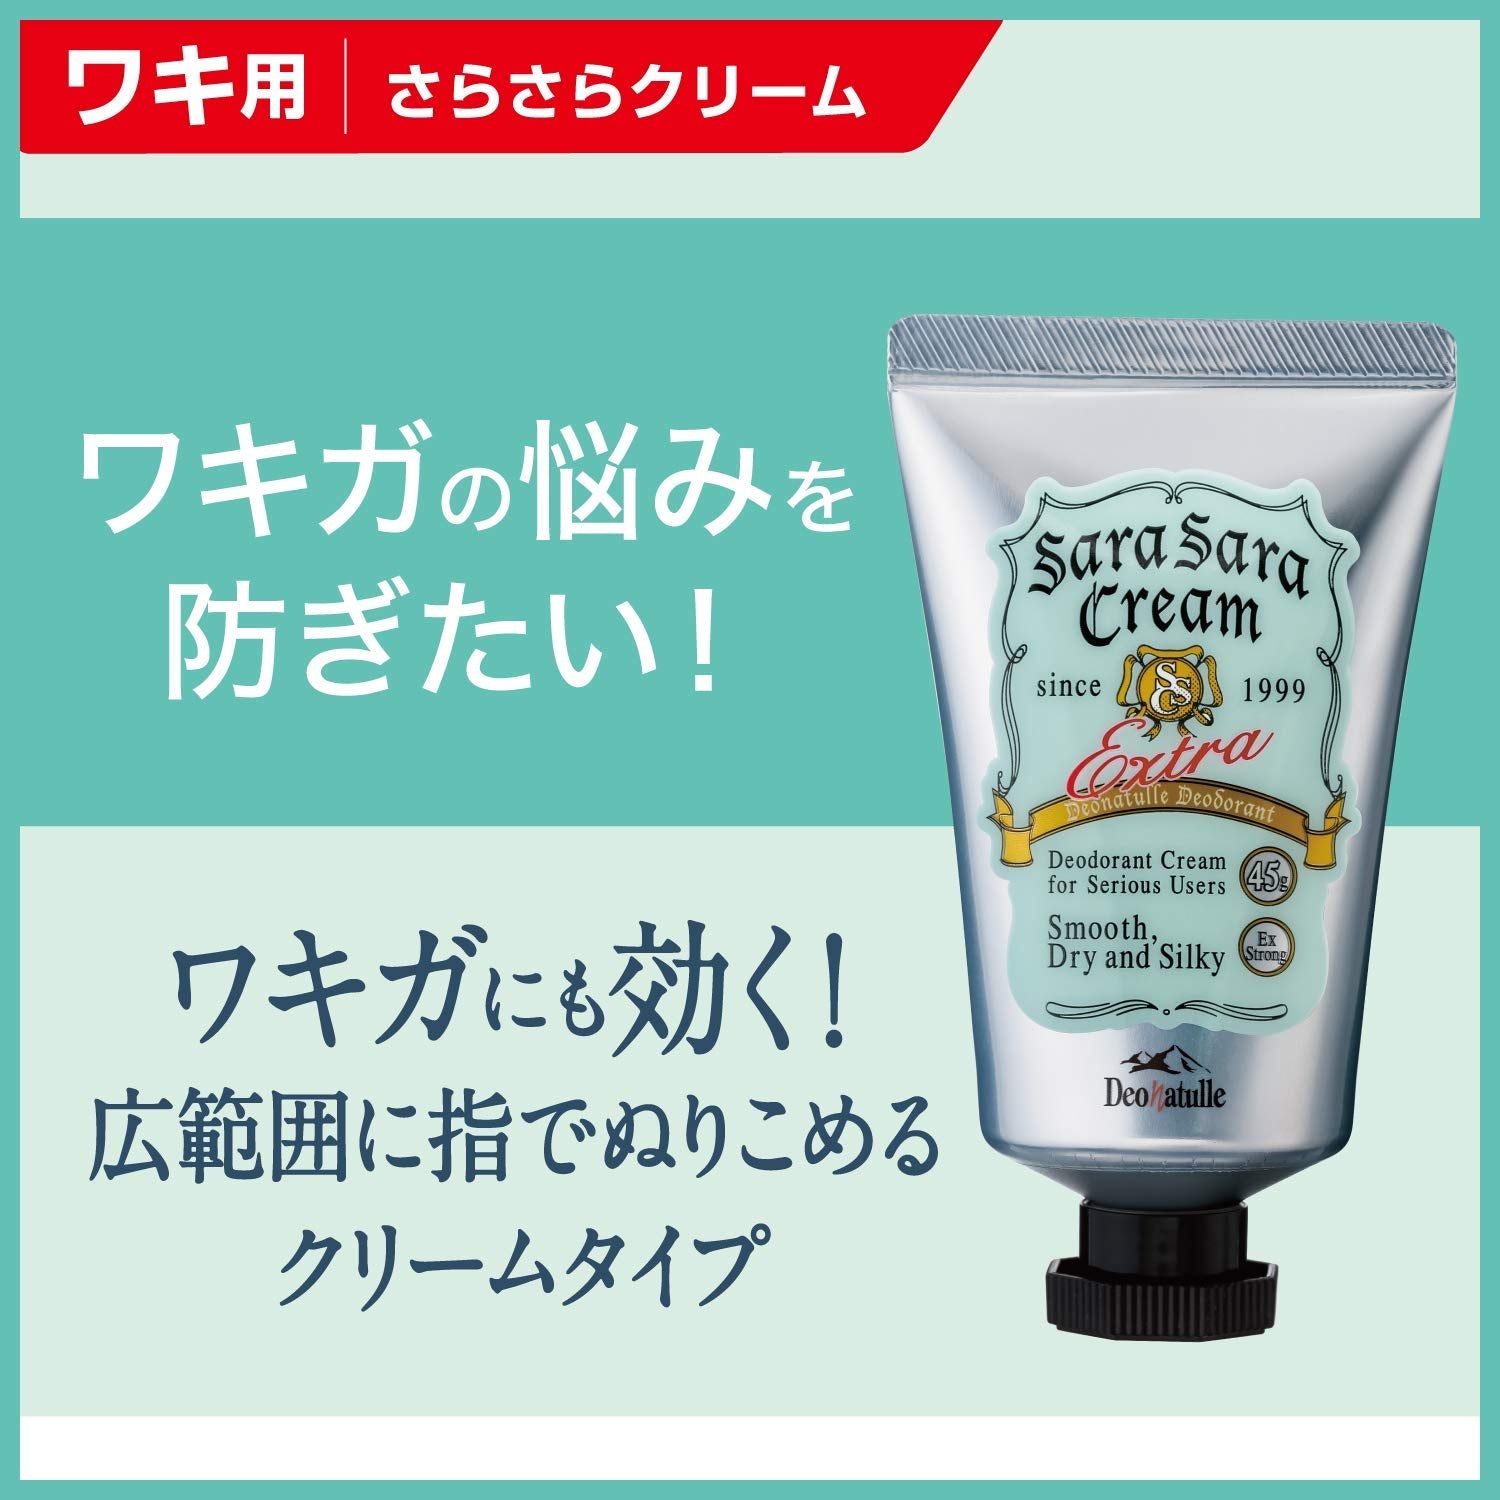 Swan White Skin Beauty Lotion From Japan 35G